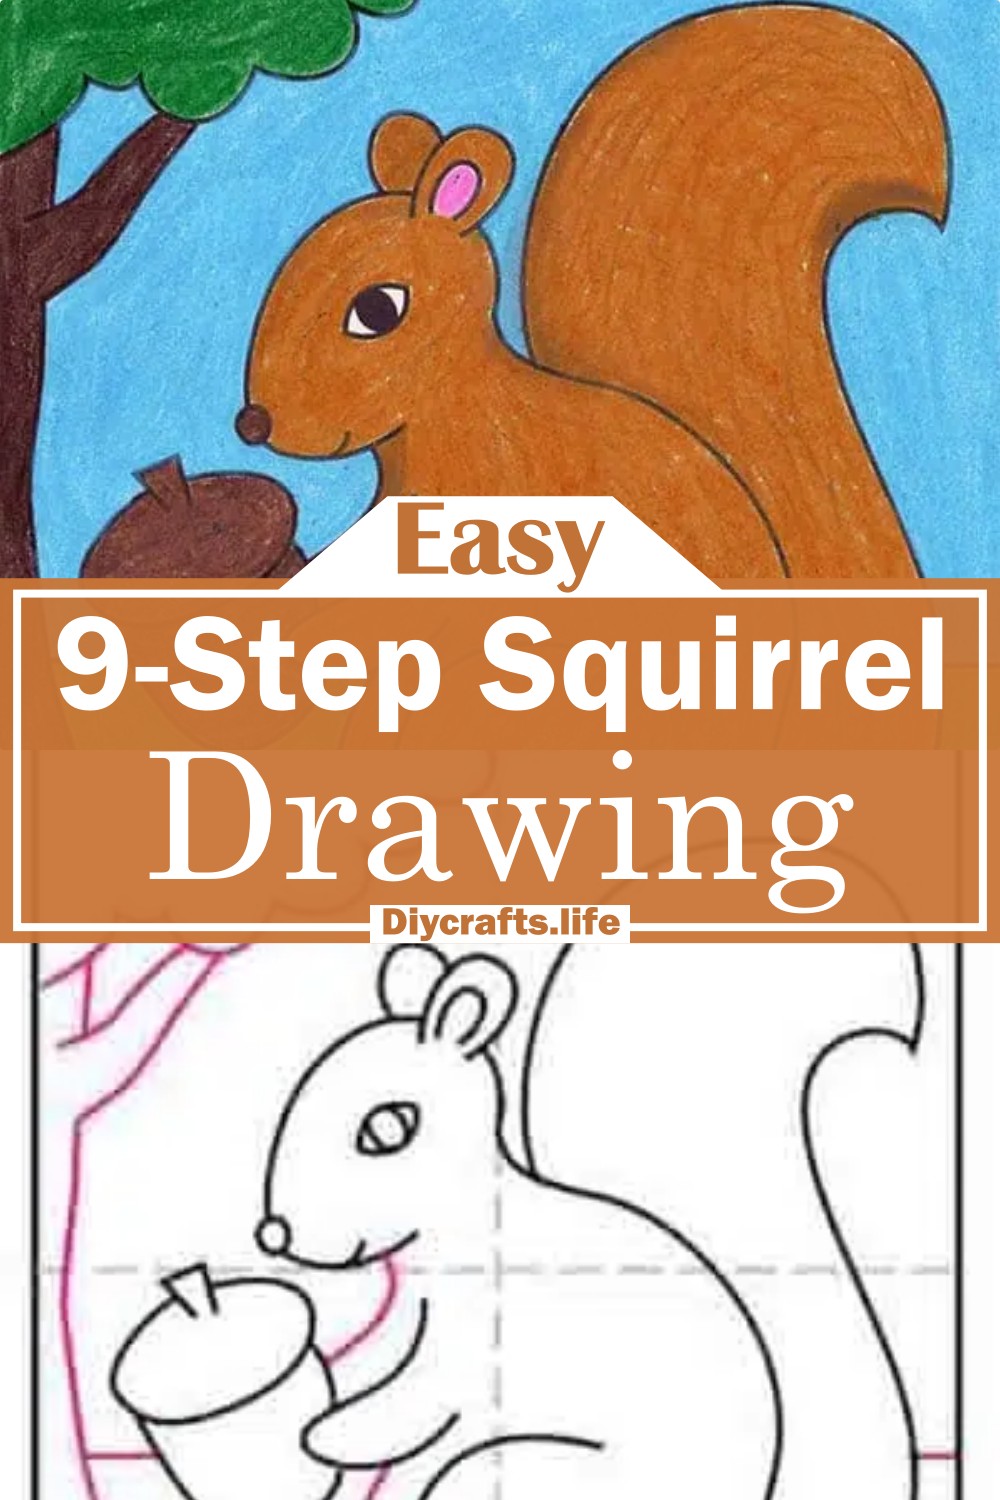 9-Step Squirrel Drawing